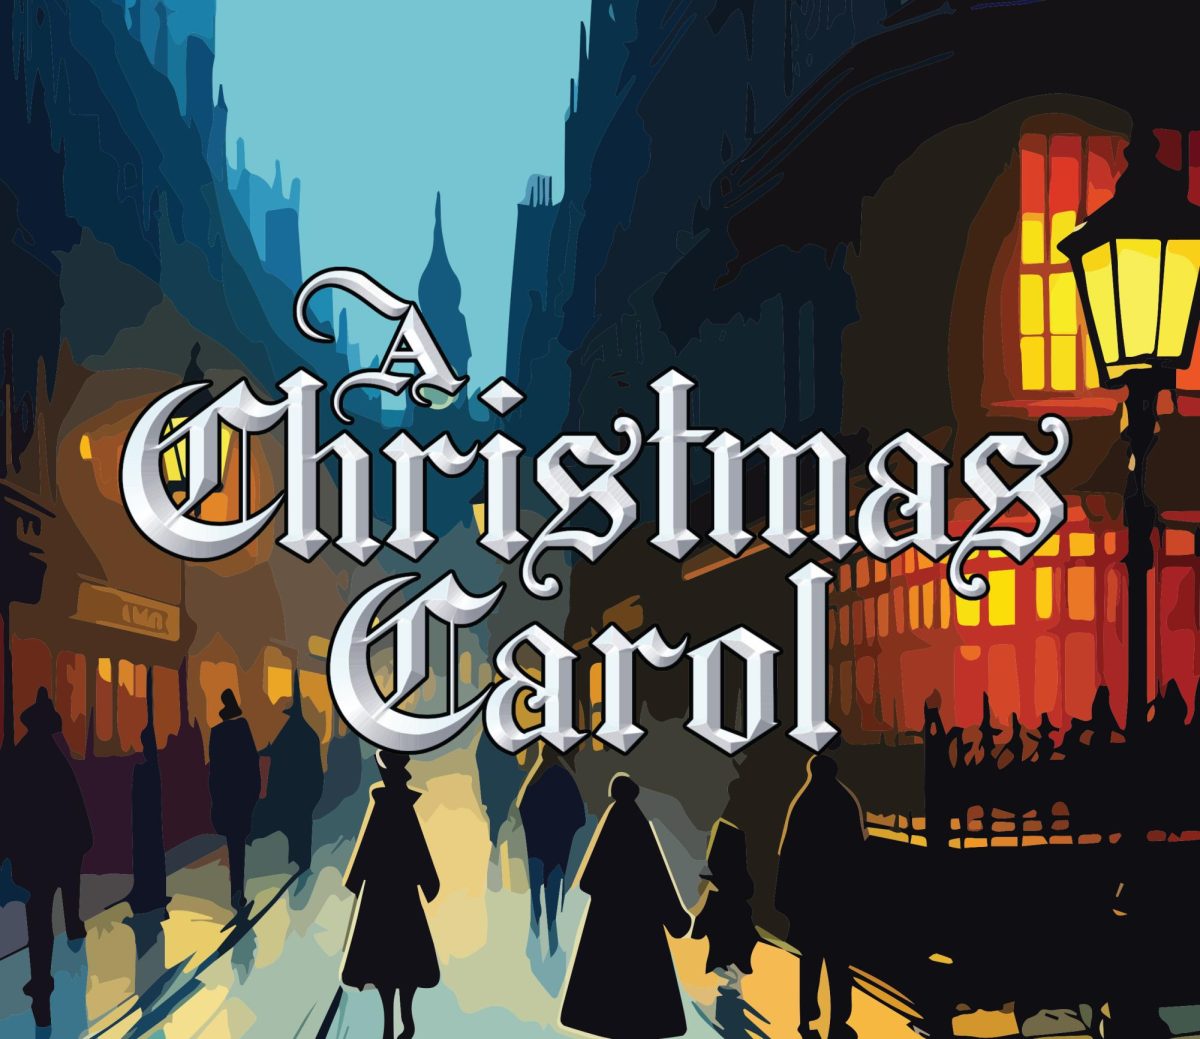 SRJC Theatre Arts brings classic tale, “A Christmas Carol,” to its main stage